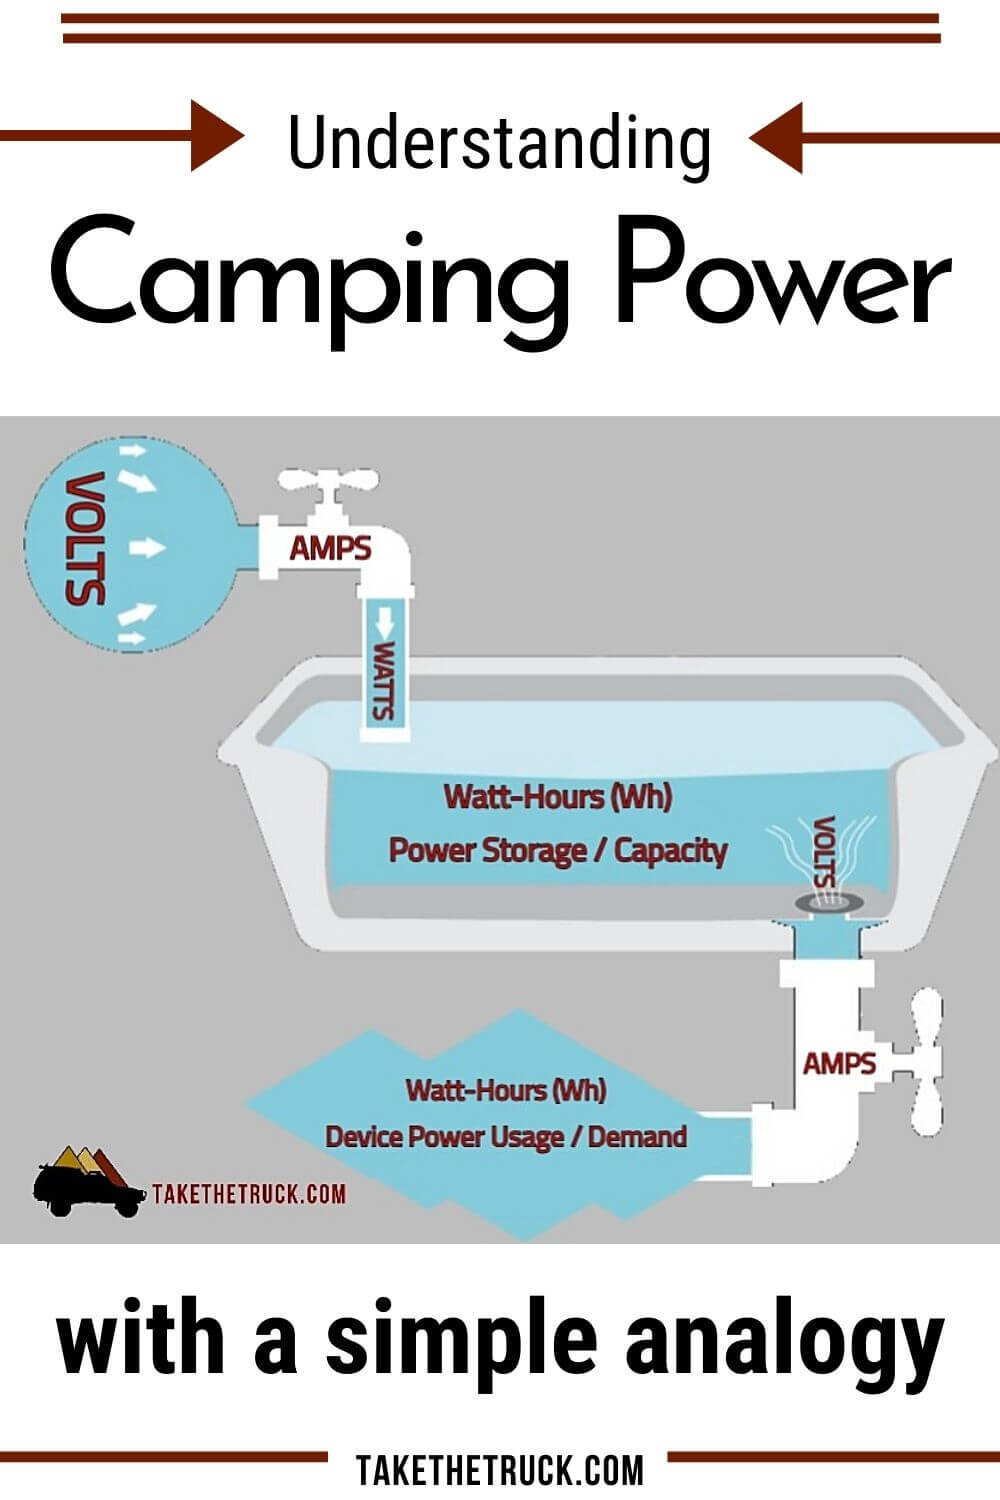 Camping power and electrical terms made easy to understand and apply to your van build, truck bed camper, or other camper (amp hours, watts, amps, watt hours, volts, AC and DC power).